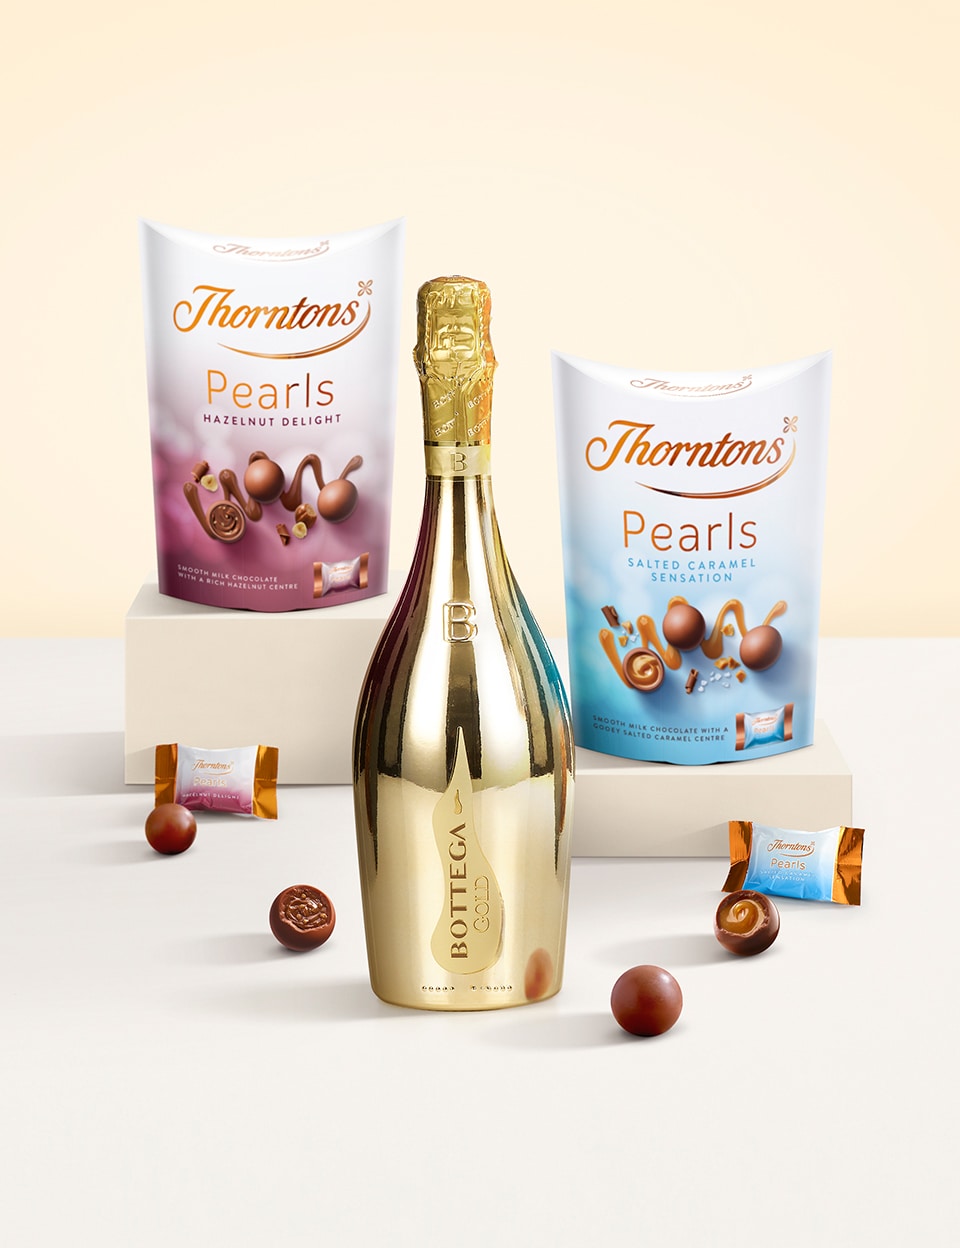 Thorntons Pearls and Prosecco Hamper